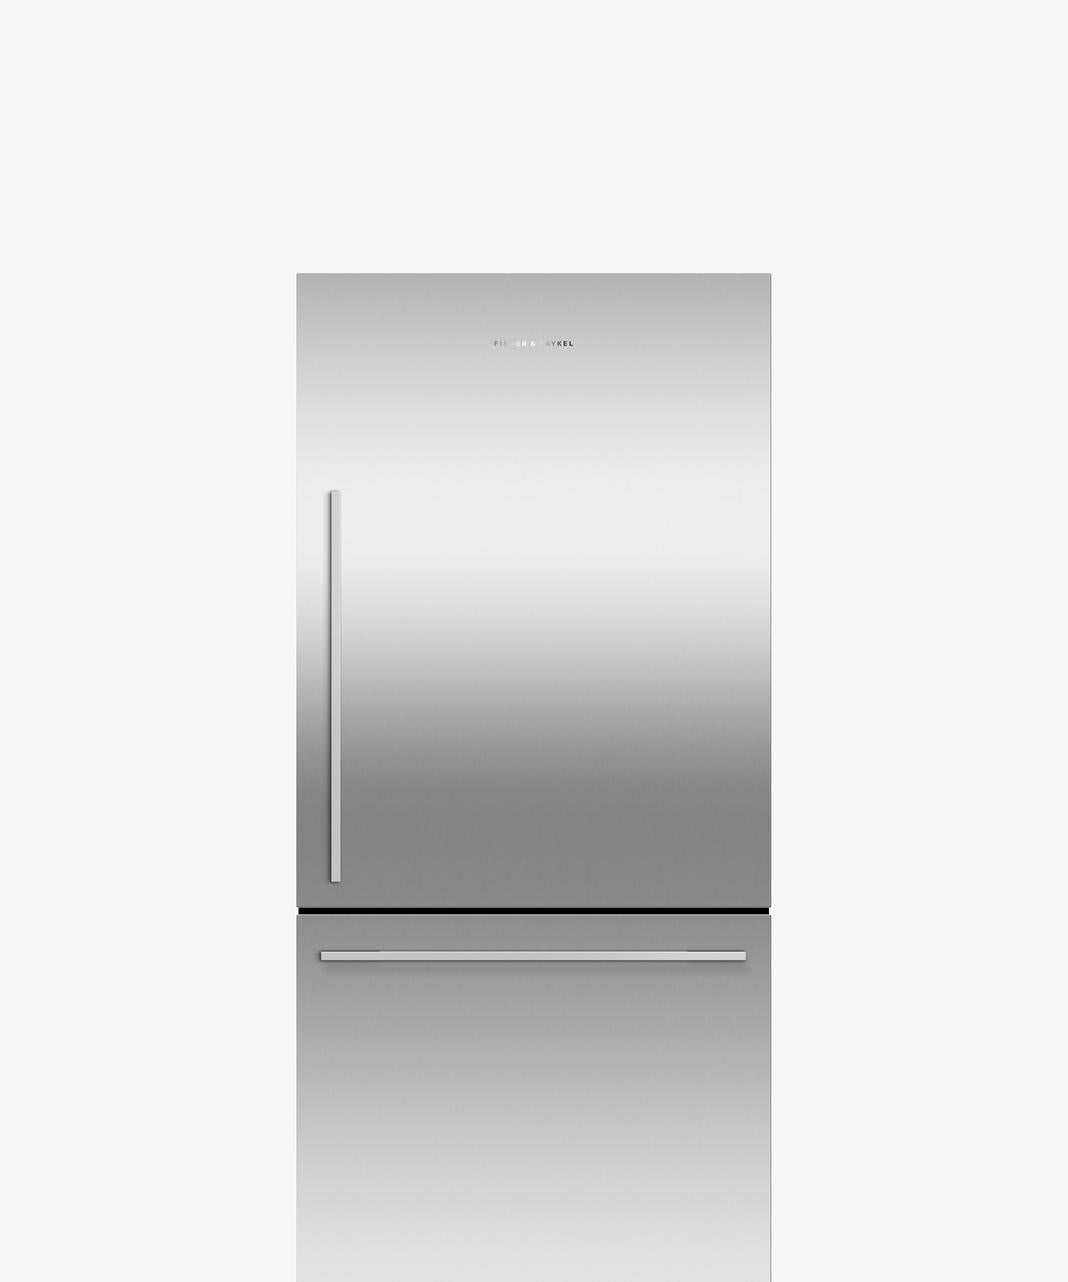 Fisher Paykel - 31 Inch 17.1 cu. ft Bottom Mount Refrigerator in Stainless - RF170WDRX5 N